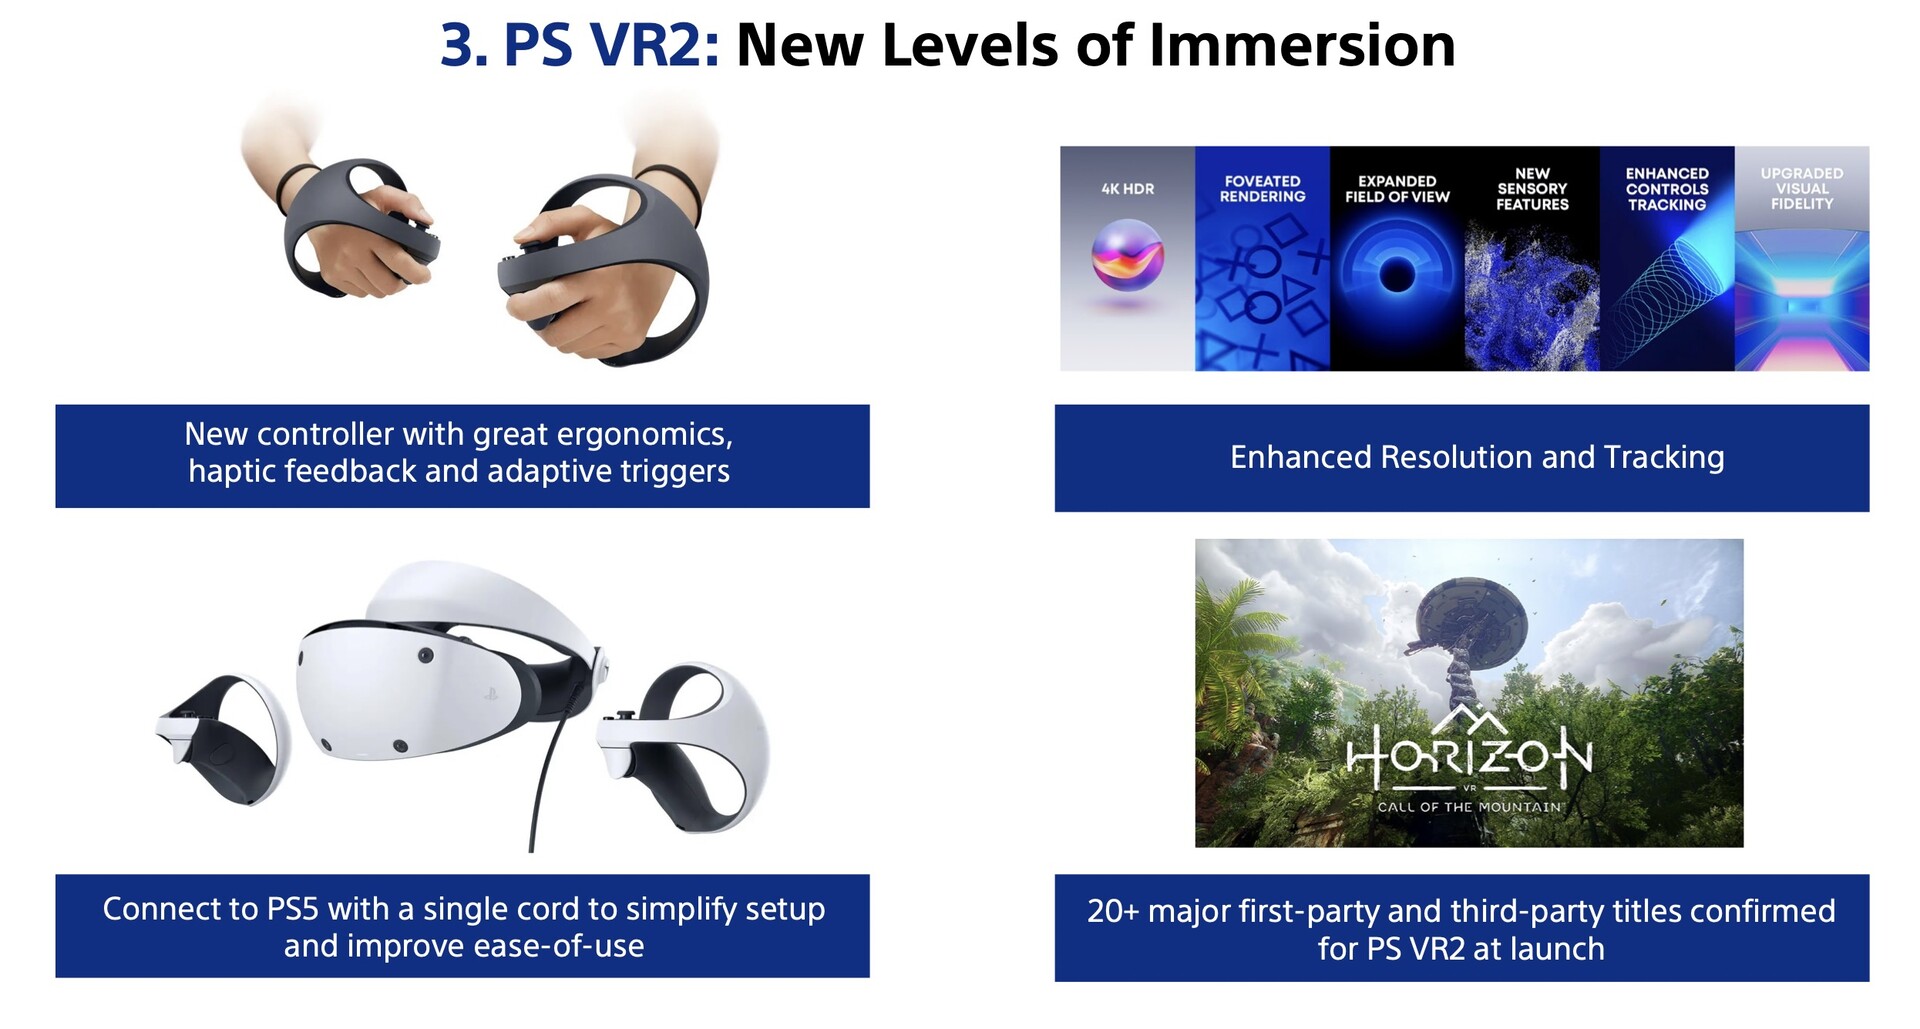 PlayStation VR2 review: A new generation of immersion